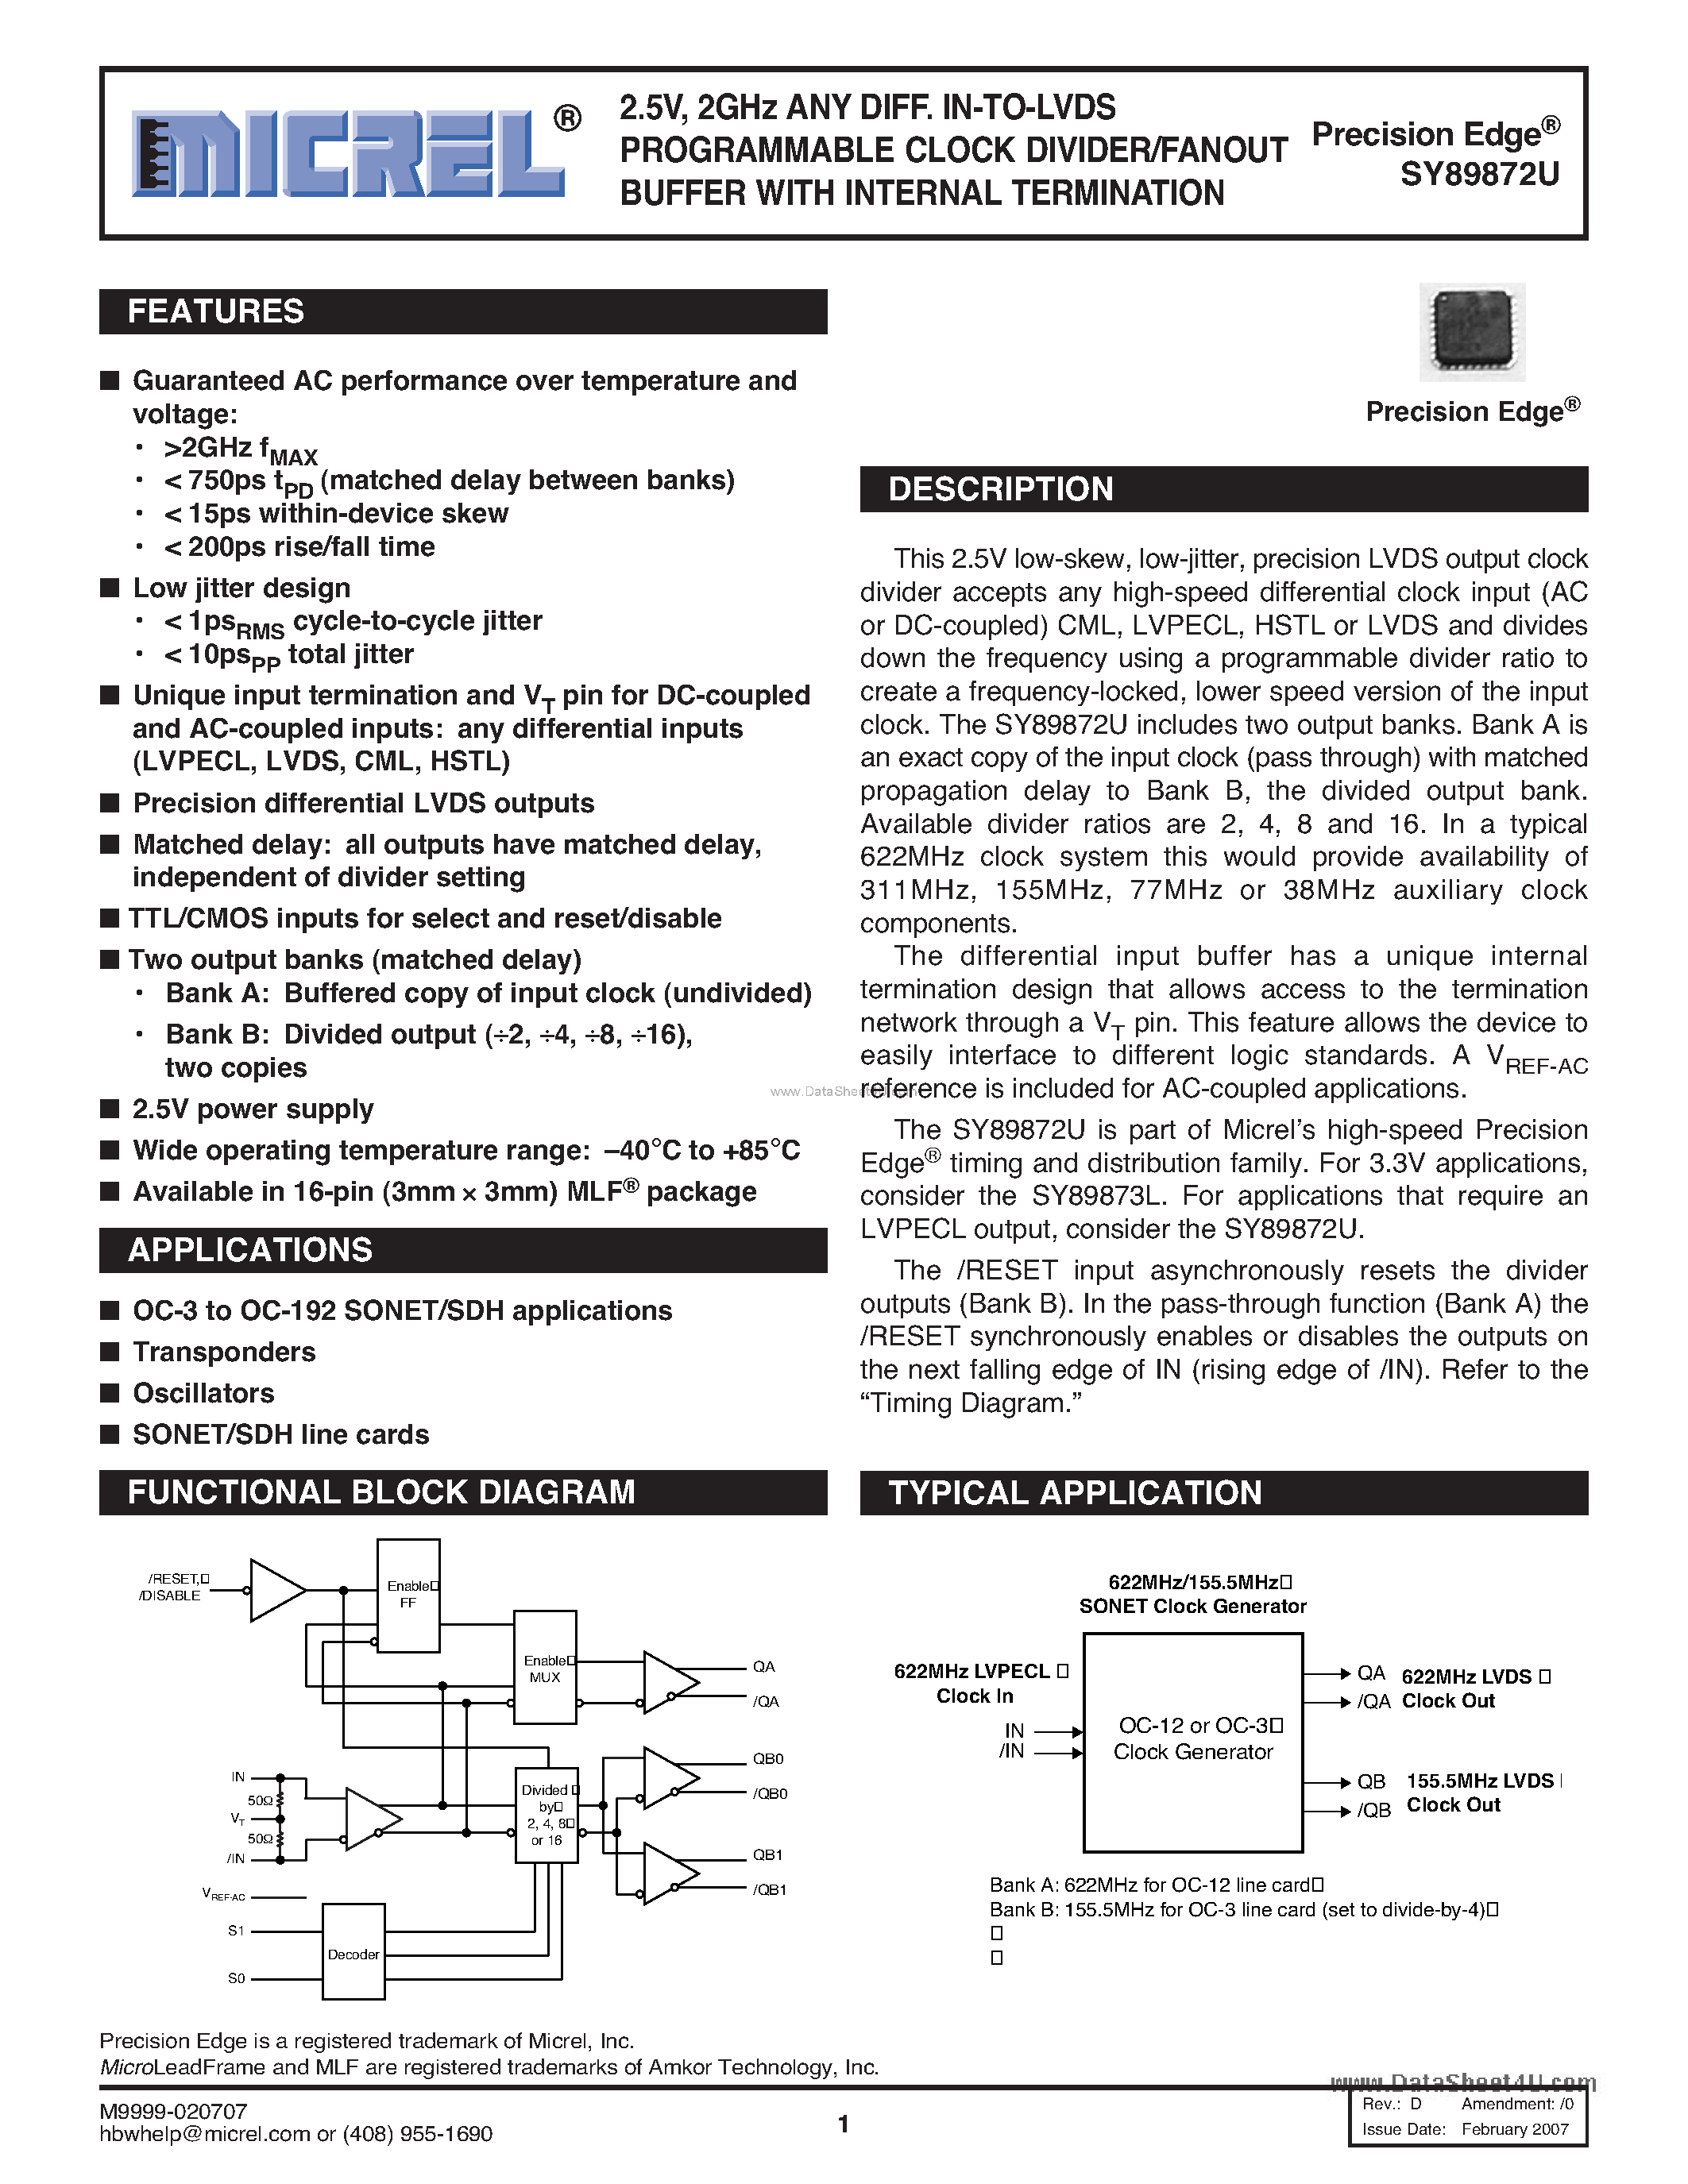 Datasheet SY89872U - IN-TO-LVDS PROGRAMMABLE CLOCK DIVIDER/FANOUT BUFFER page 1